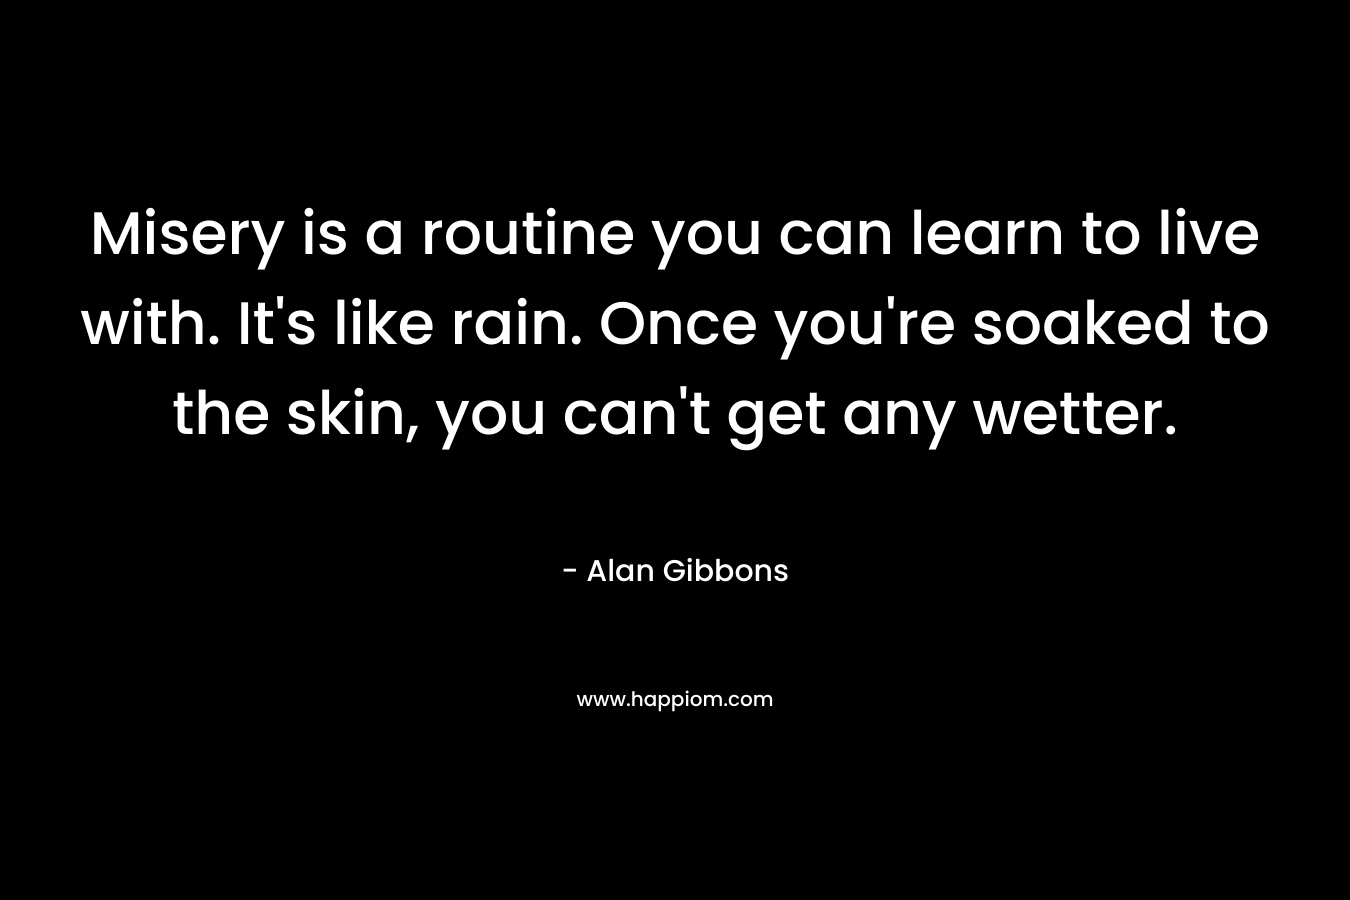 Misery is a routine you can learn to live with. It's like rain. Once you're soaked to the skin, you can't get any wetter.